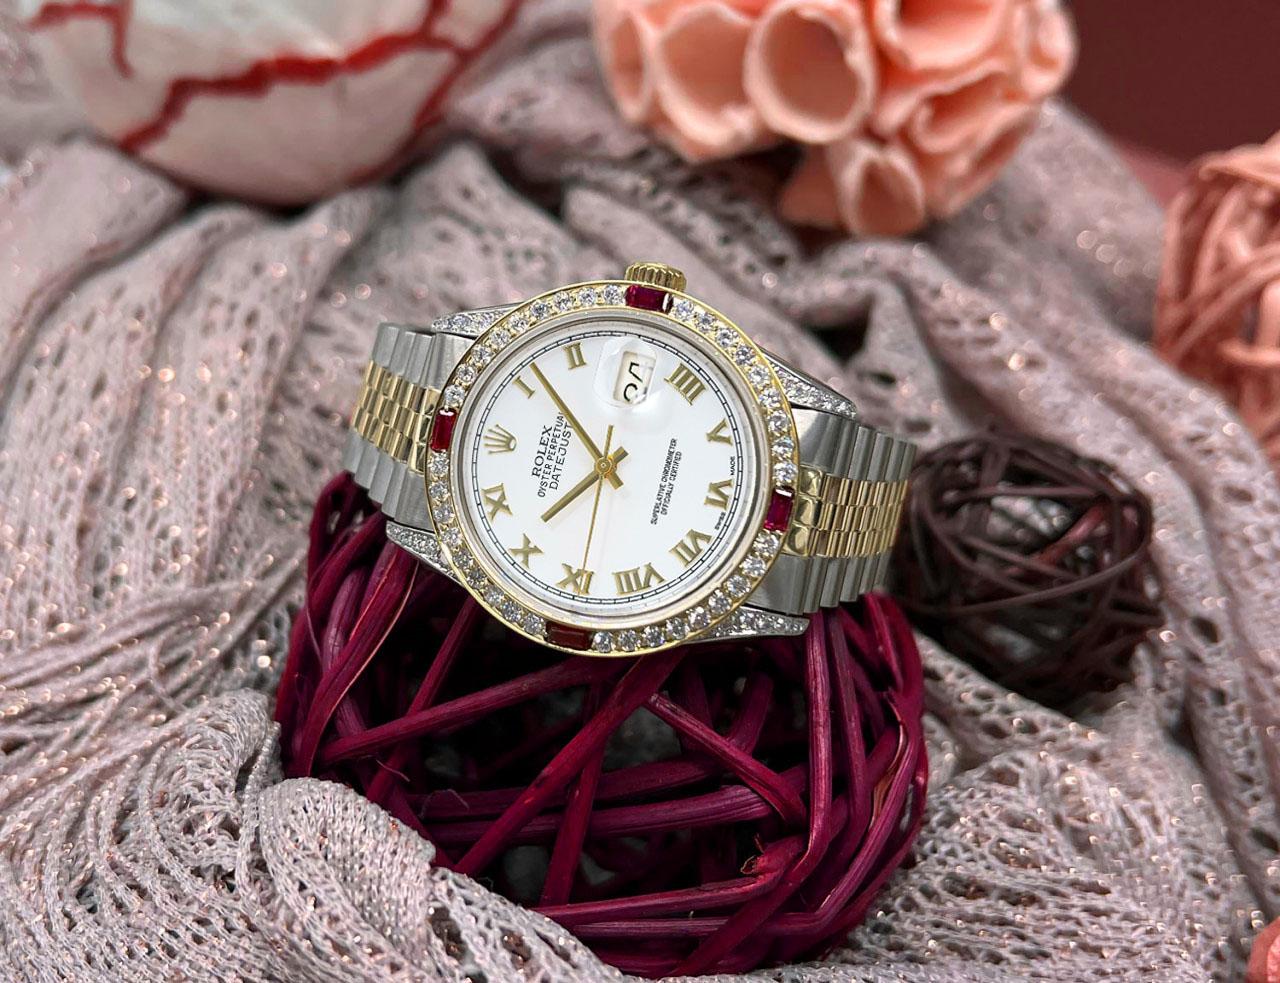 Rolex 36mm Datejust White Roman Dial Diamond Lugs/Bezel Diamond and Ruby Watch

We take great pride in presenting this timepiece, which is in impeccable condition, having undergone professional polishing and servicing to maintain its pristine